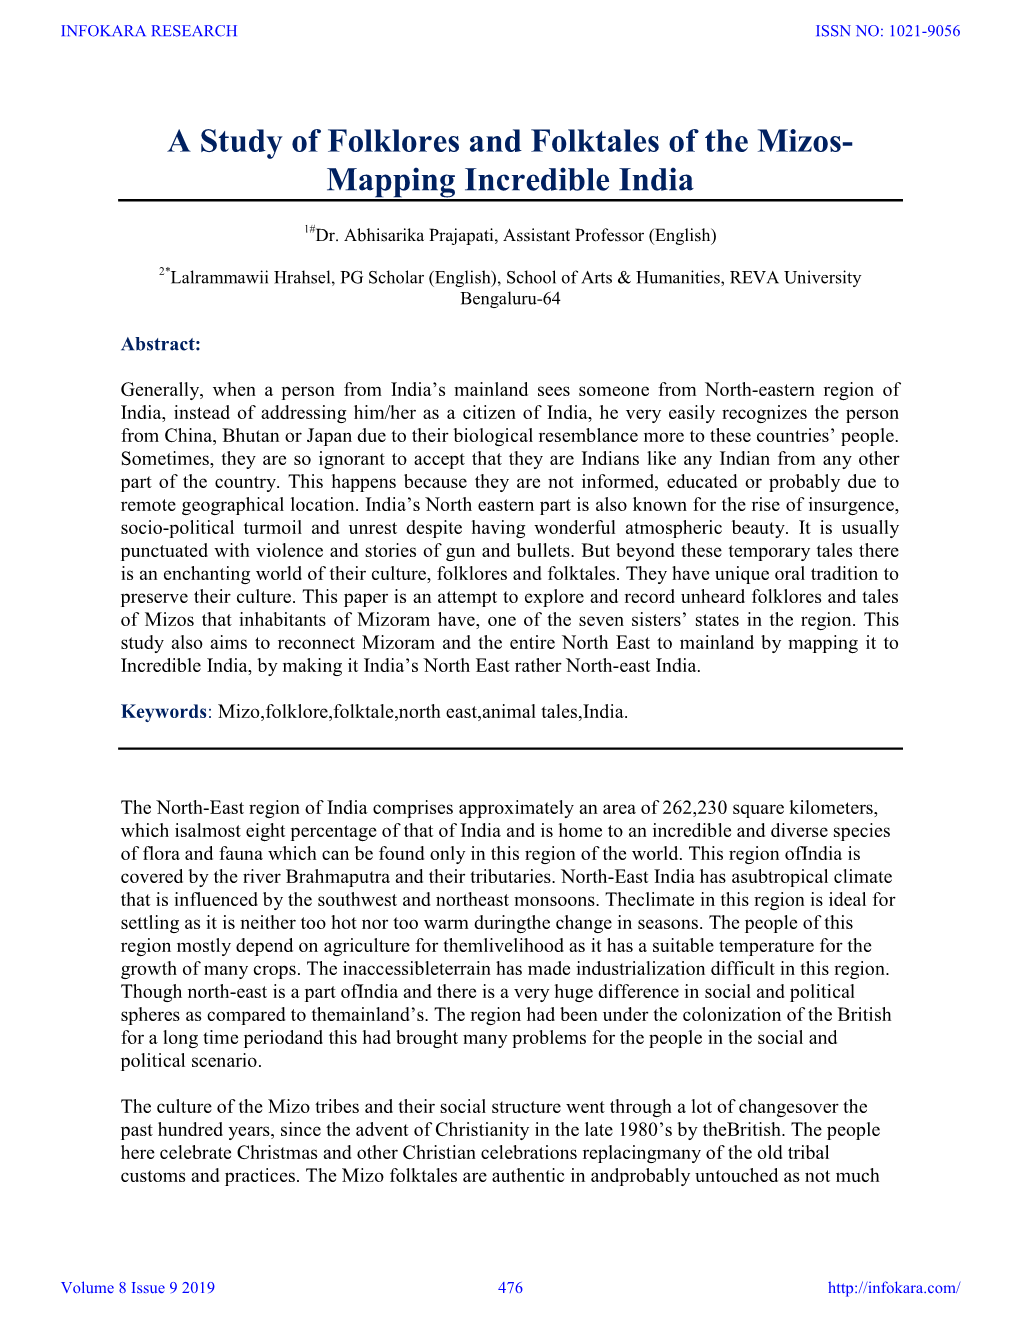 A Study of Folklores and Folktales of the Mizos- Mapping Incredible India